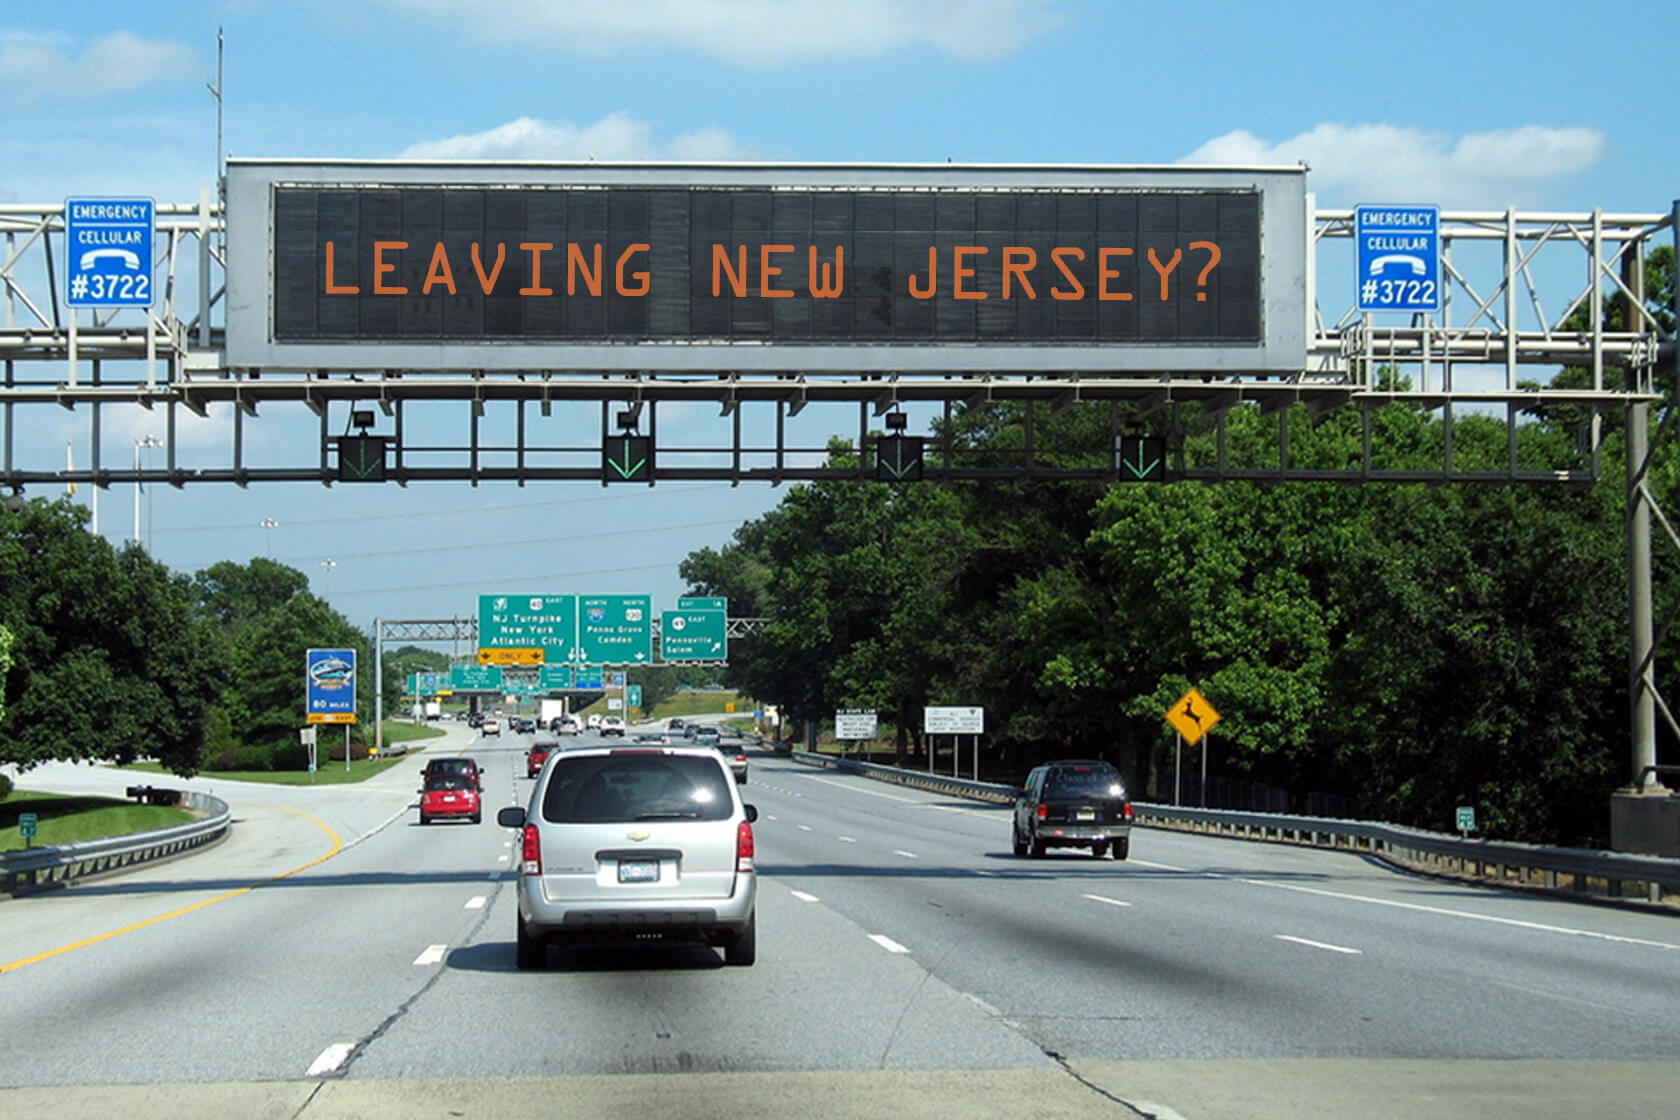 Quality of Life Index Stable; But Desire to Exit Jersey Ticks Up